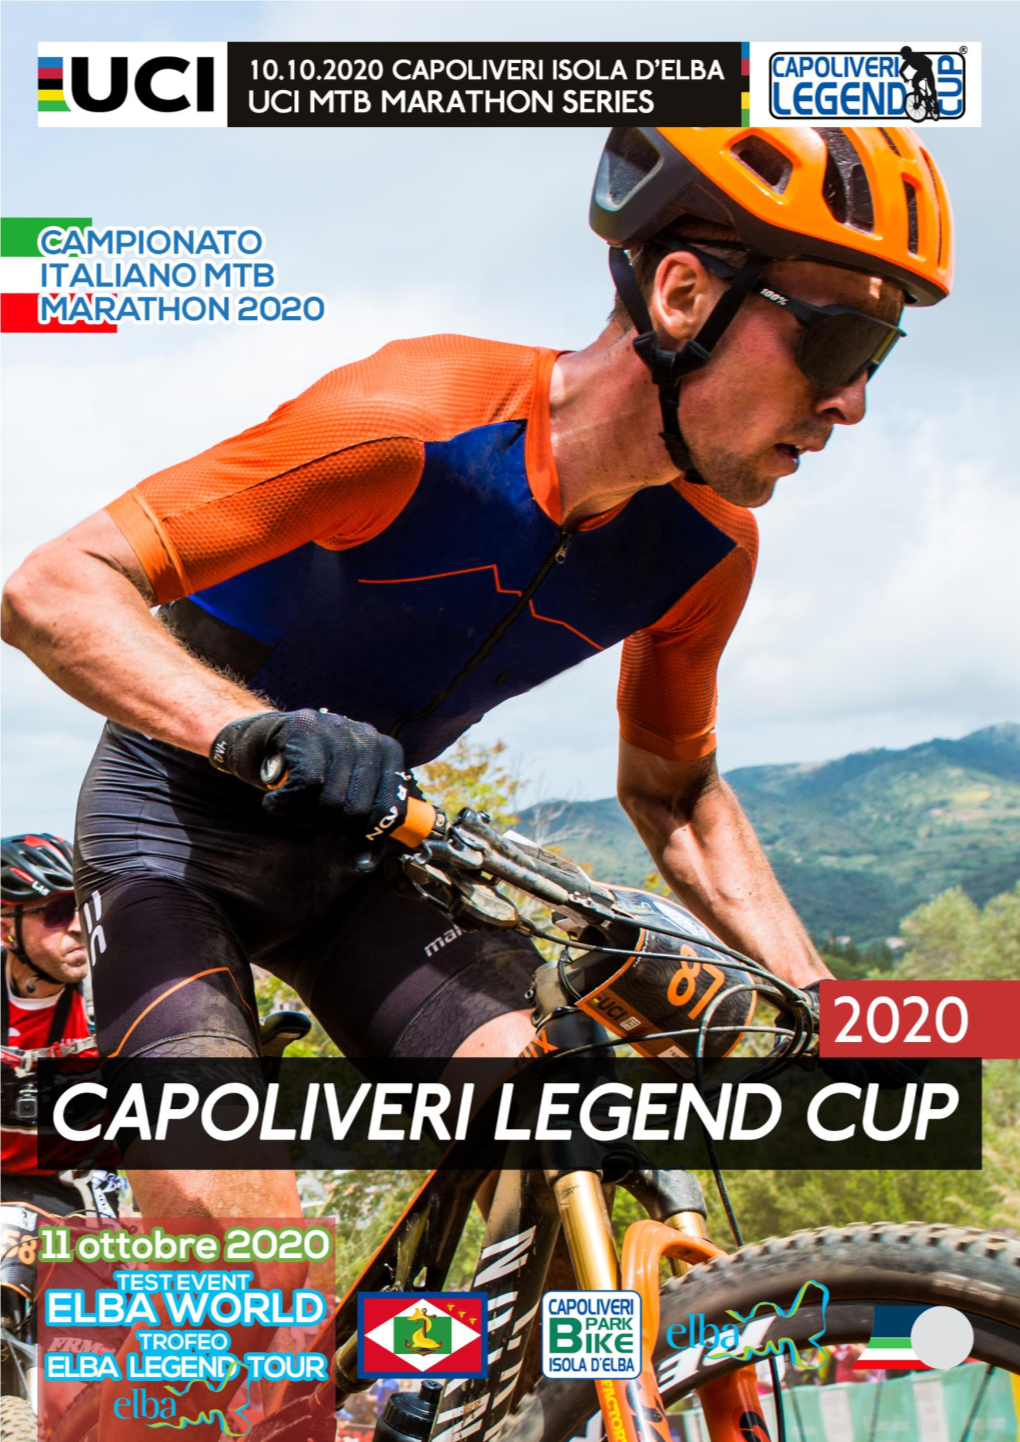 Capoliveri Legend Cup 2020 Will Be Available on the Photo Service Website